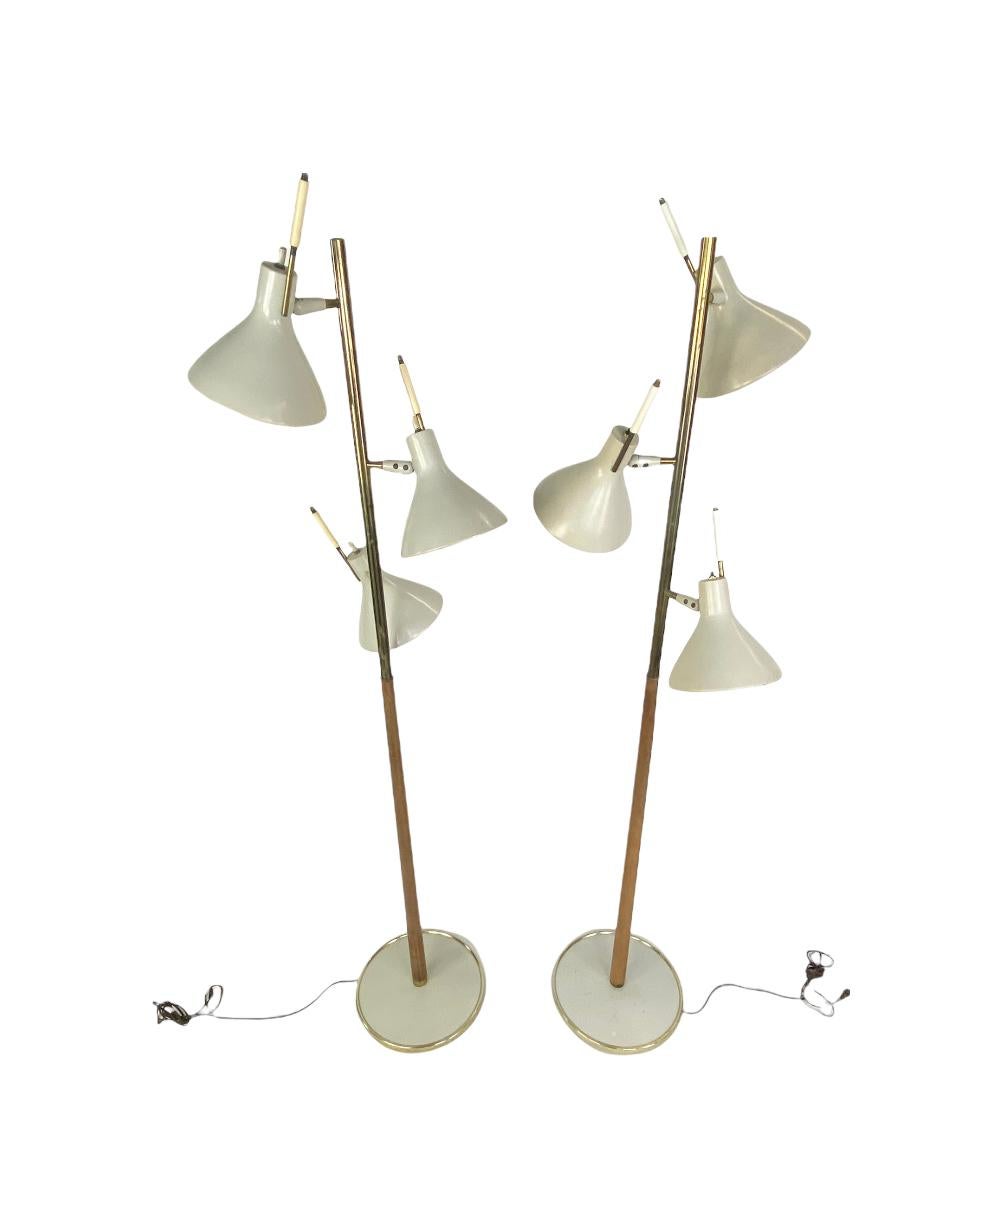 Handsome and elegant Midcentury floor lamps by Lightolier. Designed by Thomas Moser. Each with three pivoting shades, and all switches work. Executed with enameled shades, walnut pole, and brass trim. In good original condition.